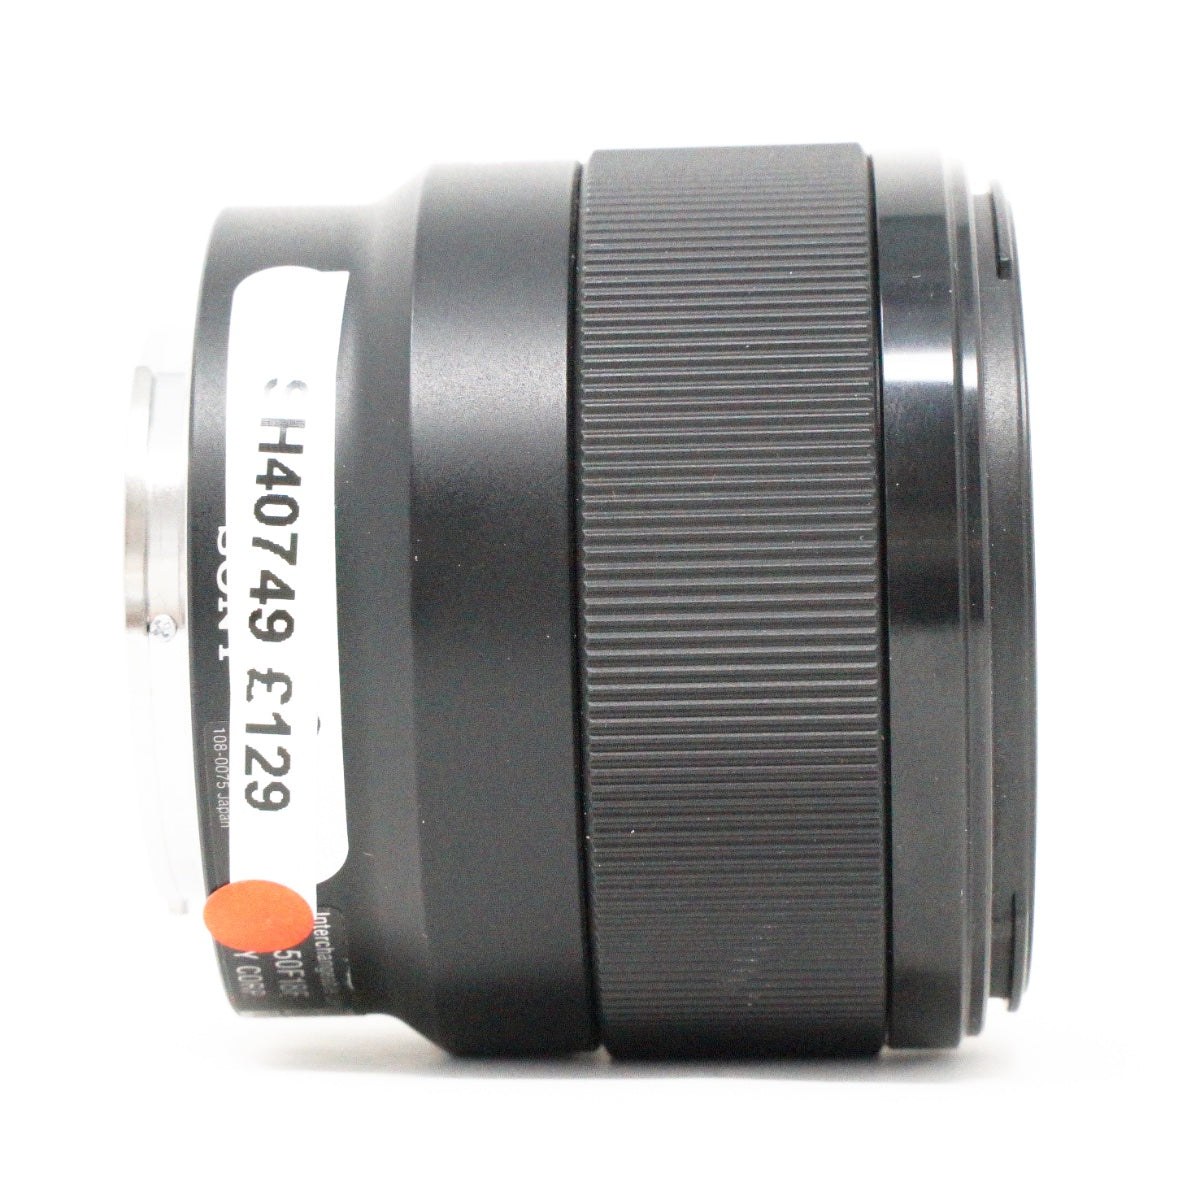 Used Sony FE 50mm F1.8 E-Mount lens with hood